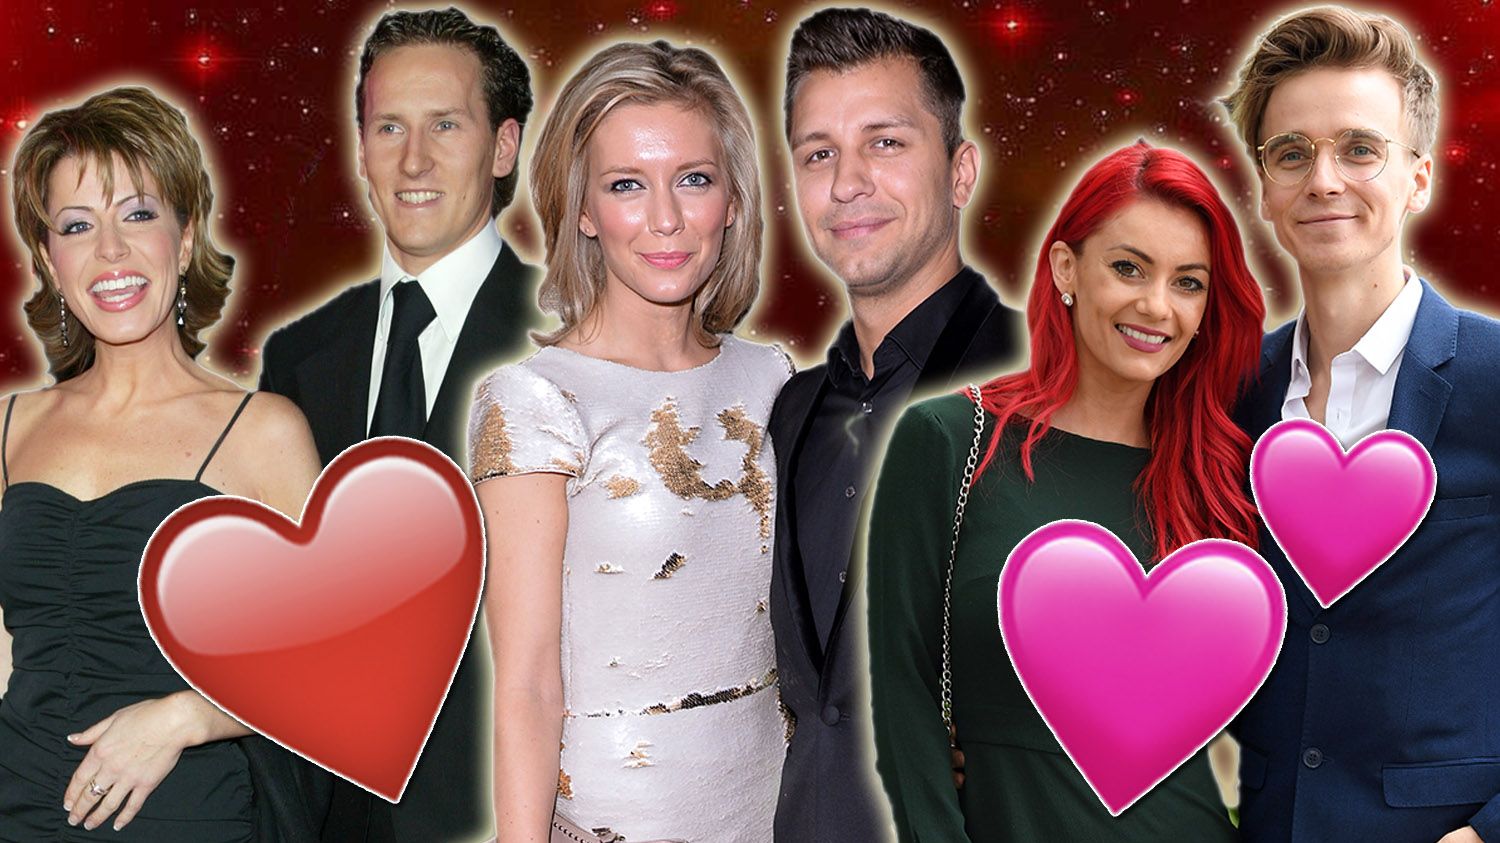 Dancing With the Stars' Couples Who Dated, Got Married